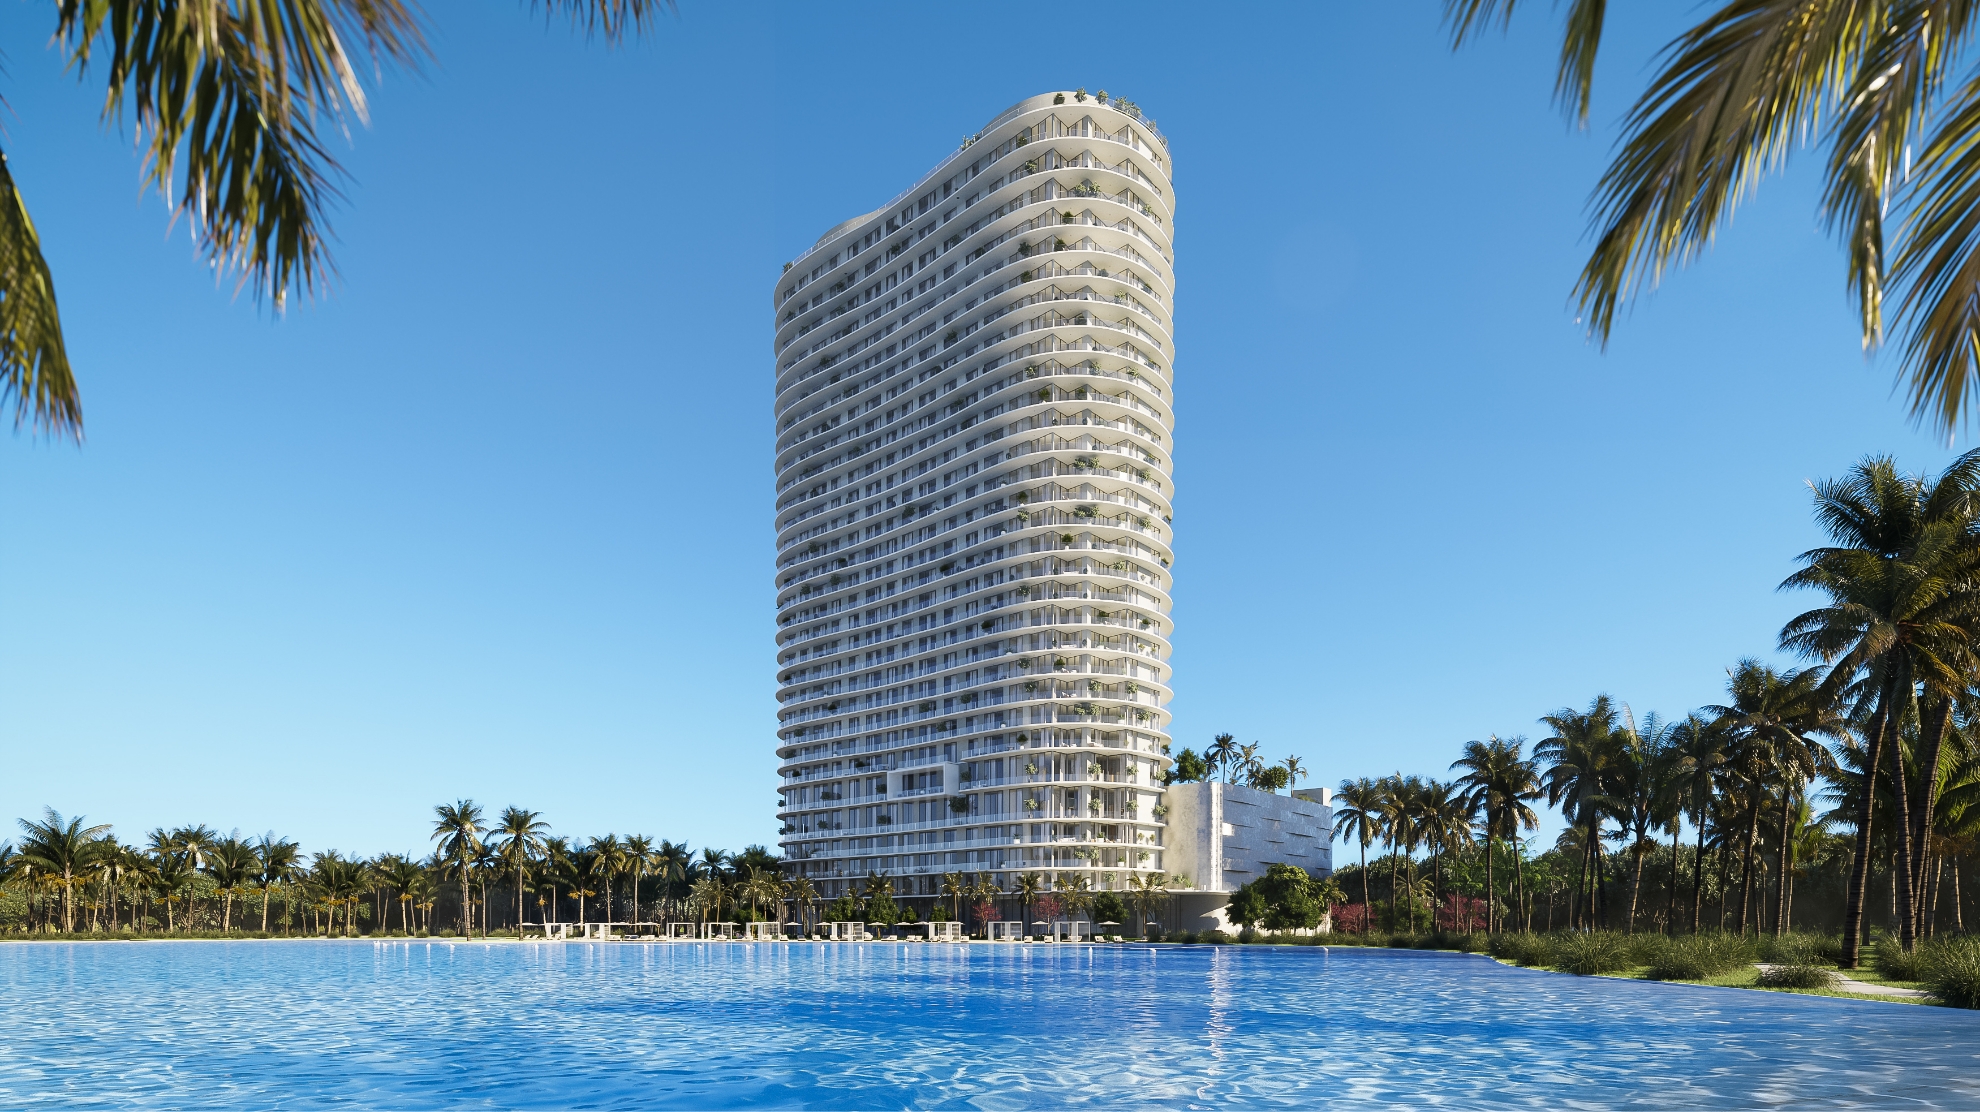 ONE Park Tower by Turnberry: A Glimpse into Miami’s Luxurious SoLé Mia Masterpiece Residences